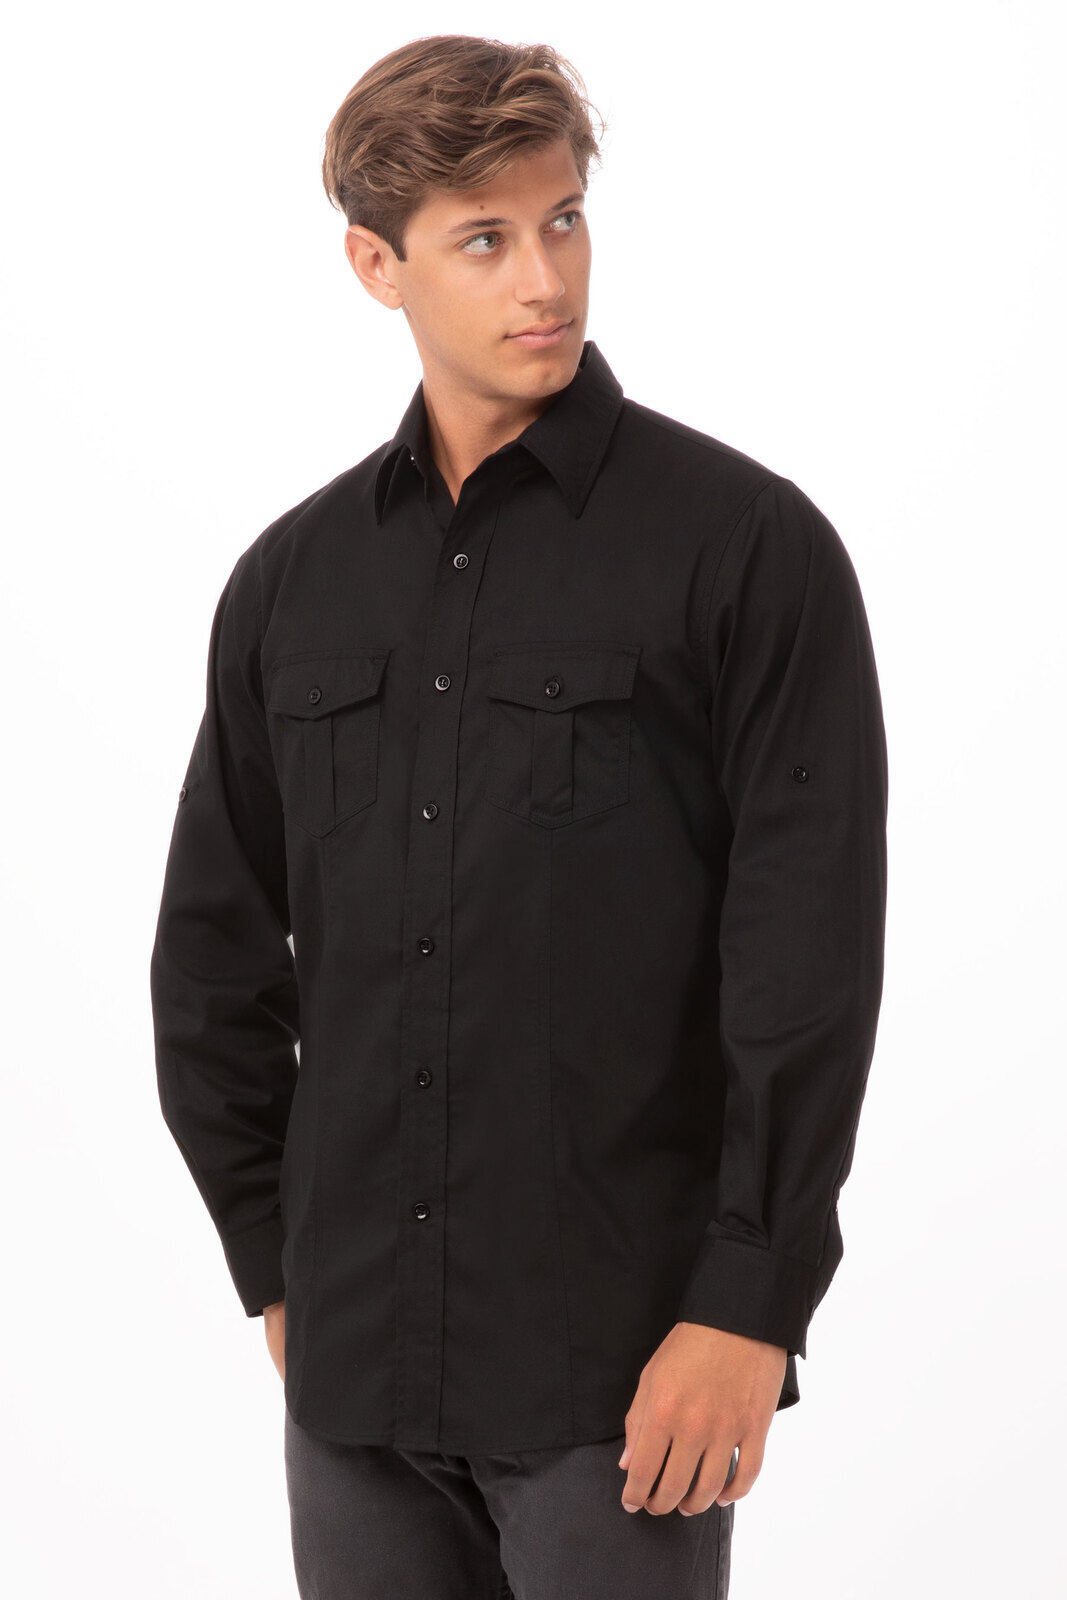 Chef Works Philippines | Men's Two-Pocket Shirt (DPDS) - Chef Works ...